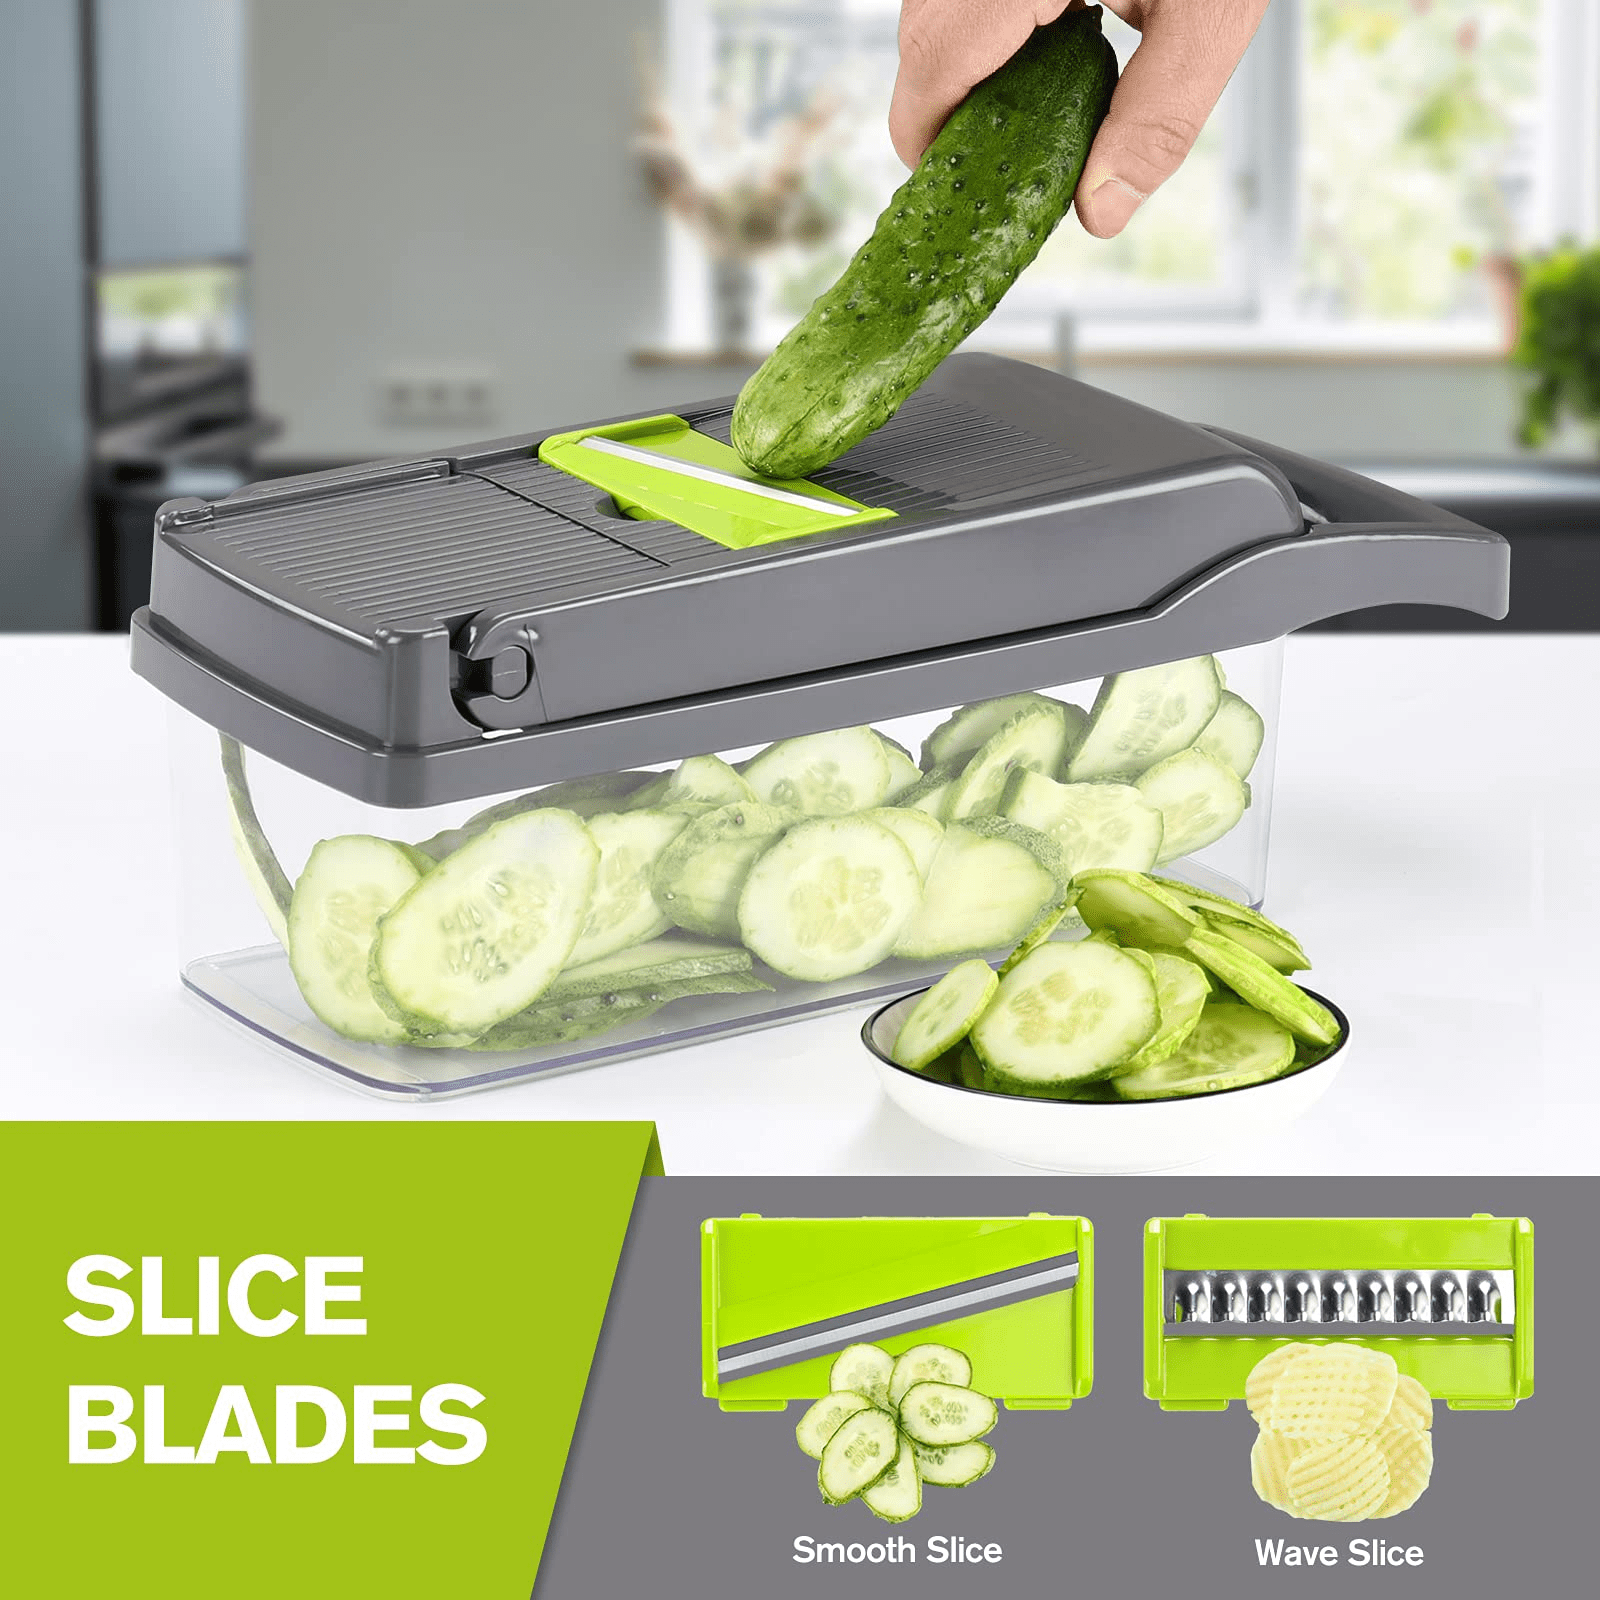 Cofelife 12 in 1 Pro Vegetable Chopper, Multi-functional Onion Chopper, Vegetable Cutter Stainless Steel Blades, Vegetable Slicer Container, Mandoline